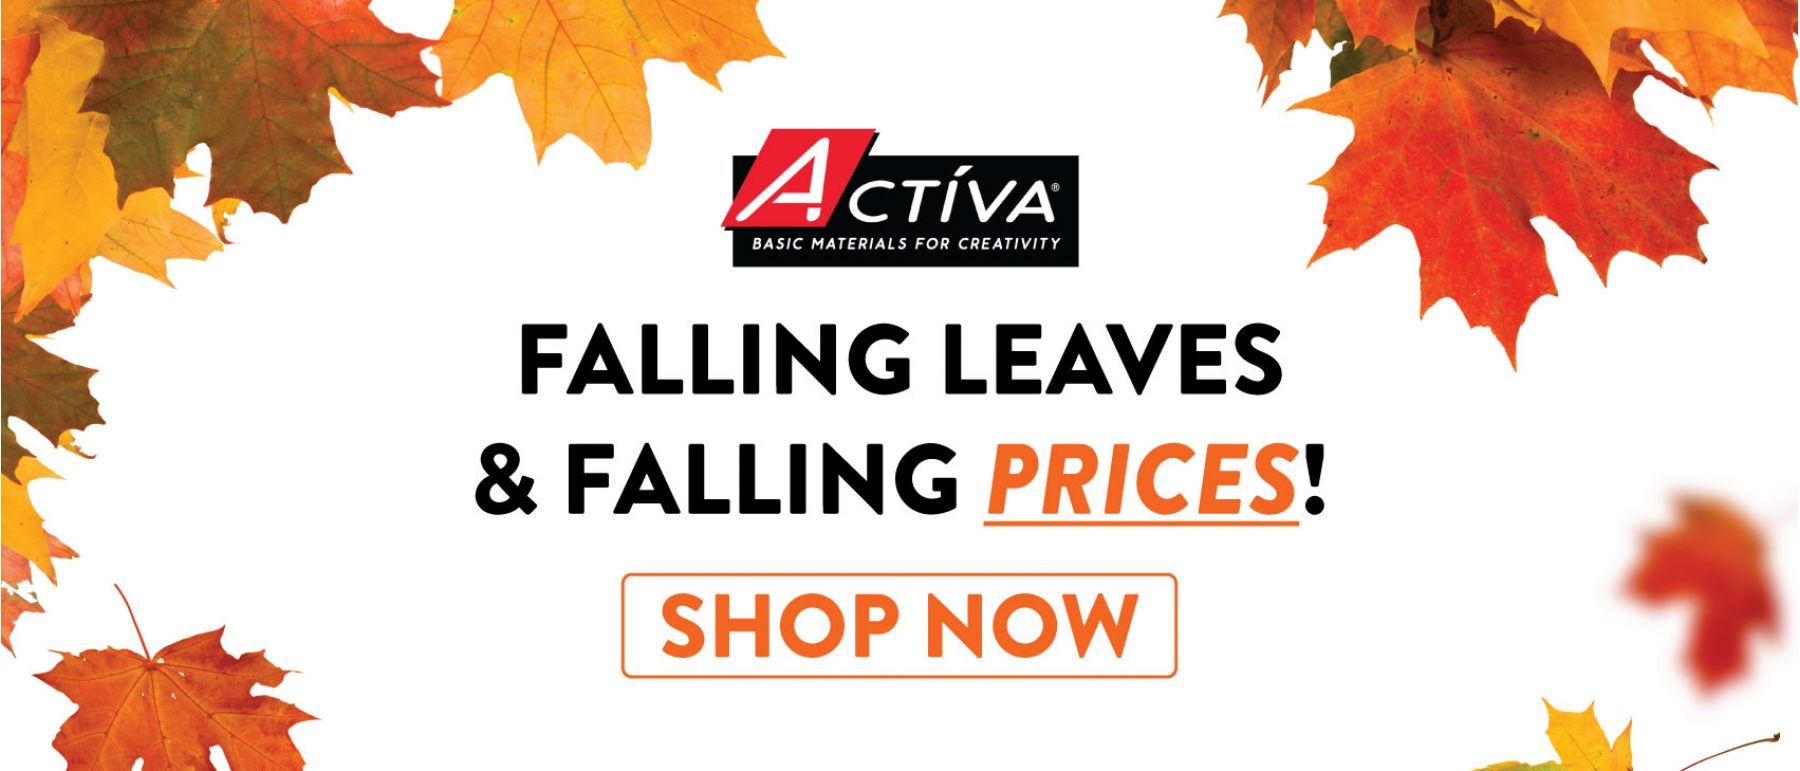 Falling Leaves & Falling Prices